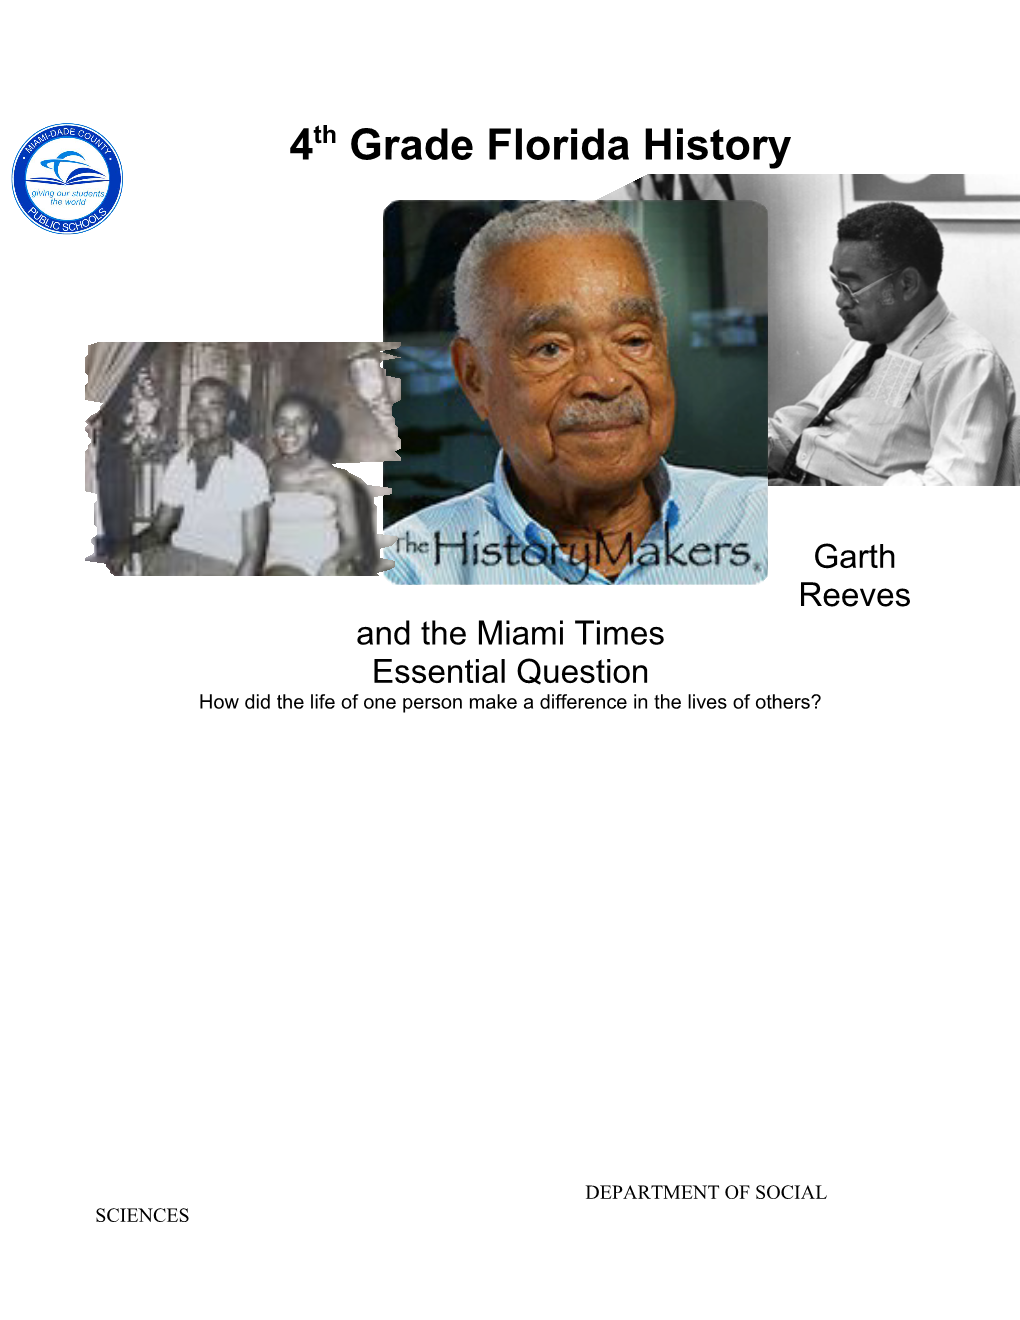 Garth Reeves and the Miami Times